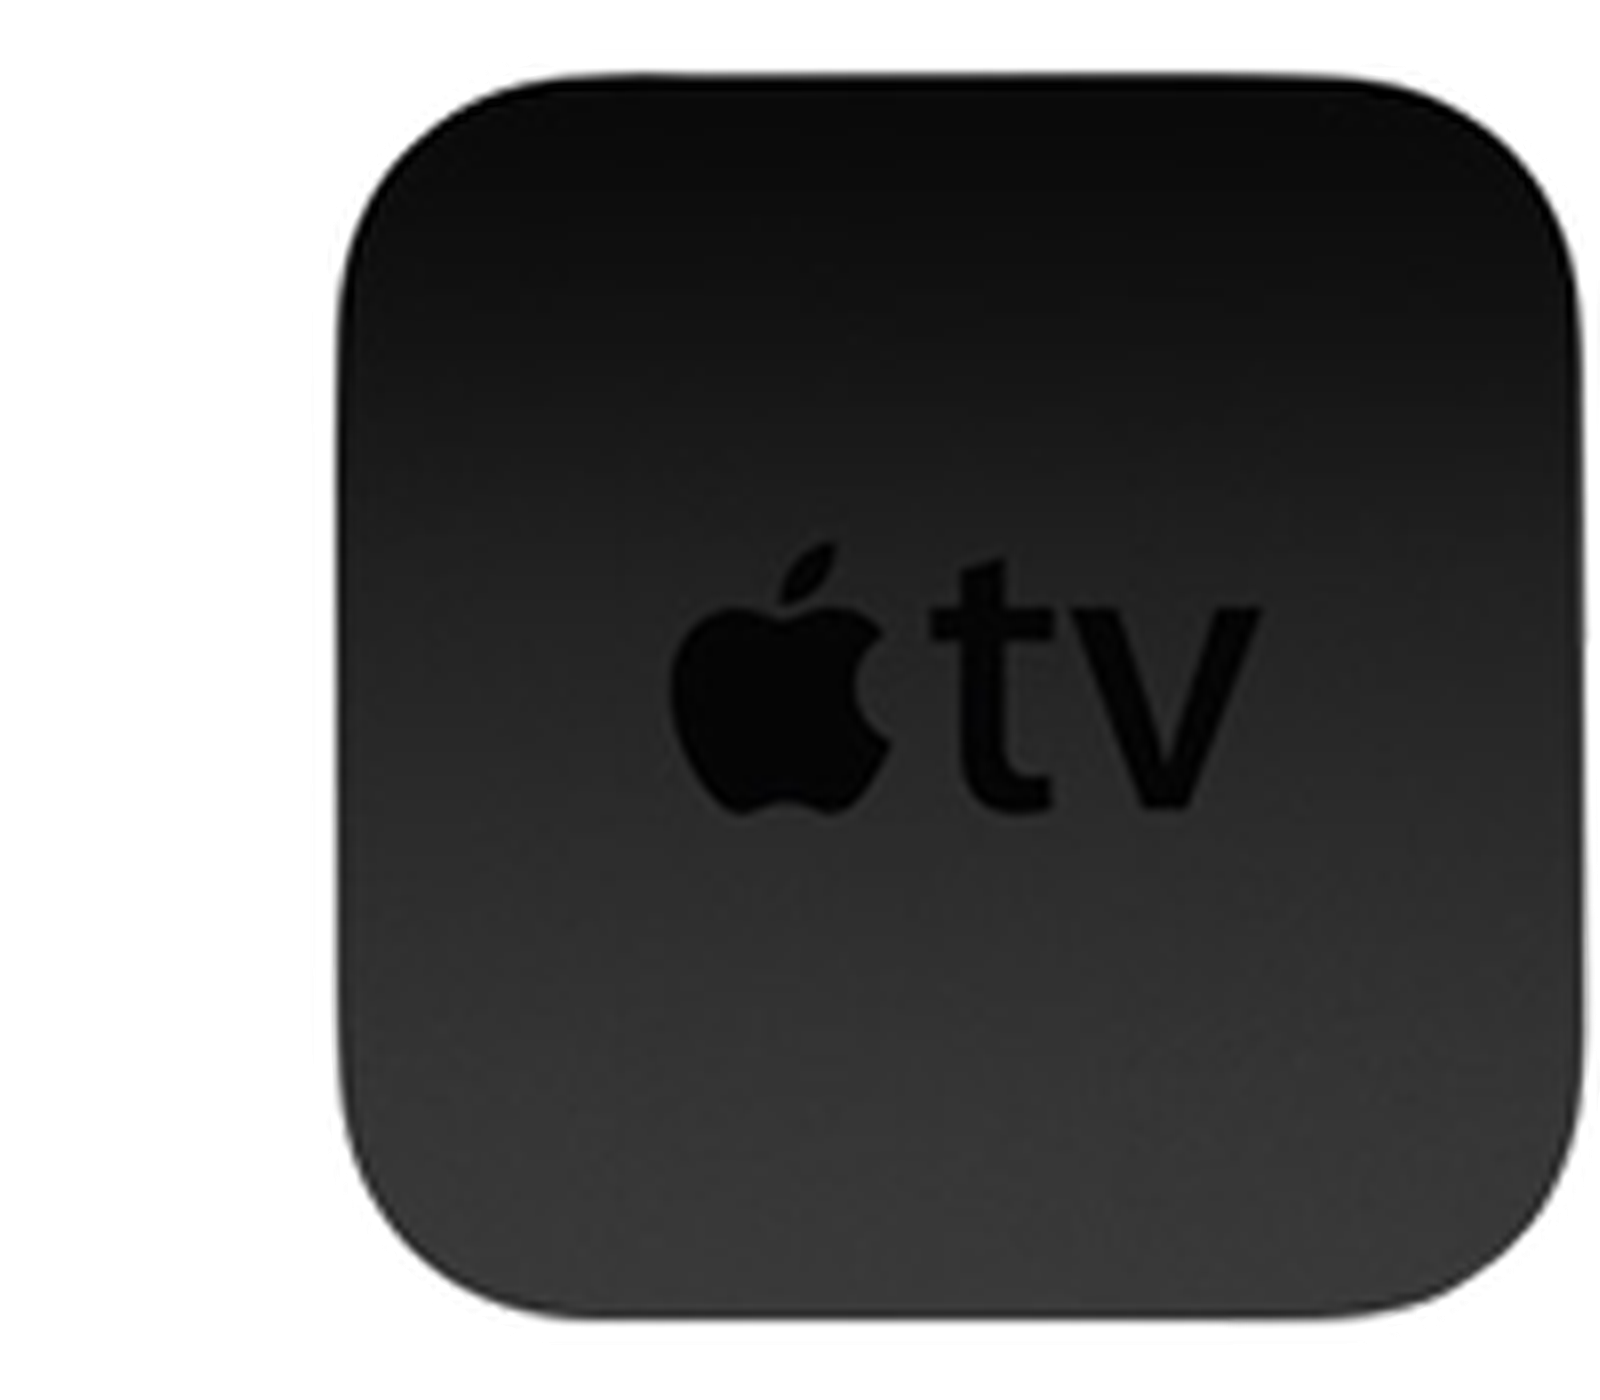 Apple Could Be Planning to Release Updated Apple TV Box Next Month